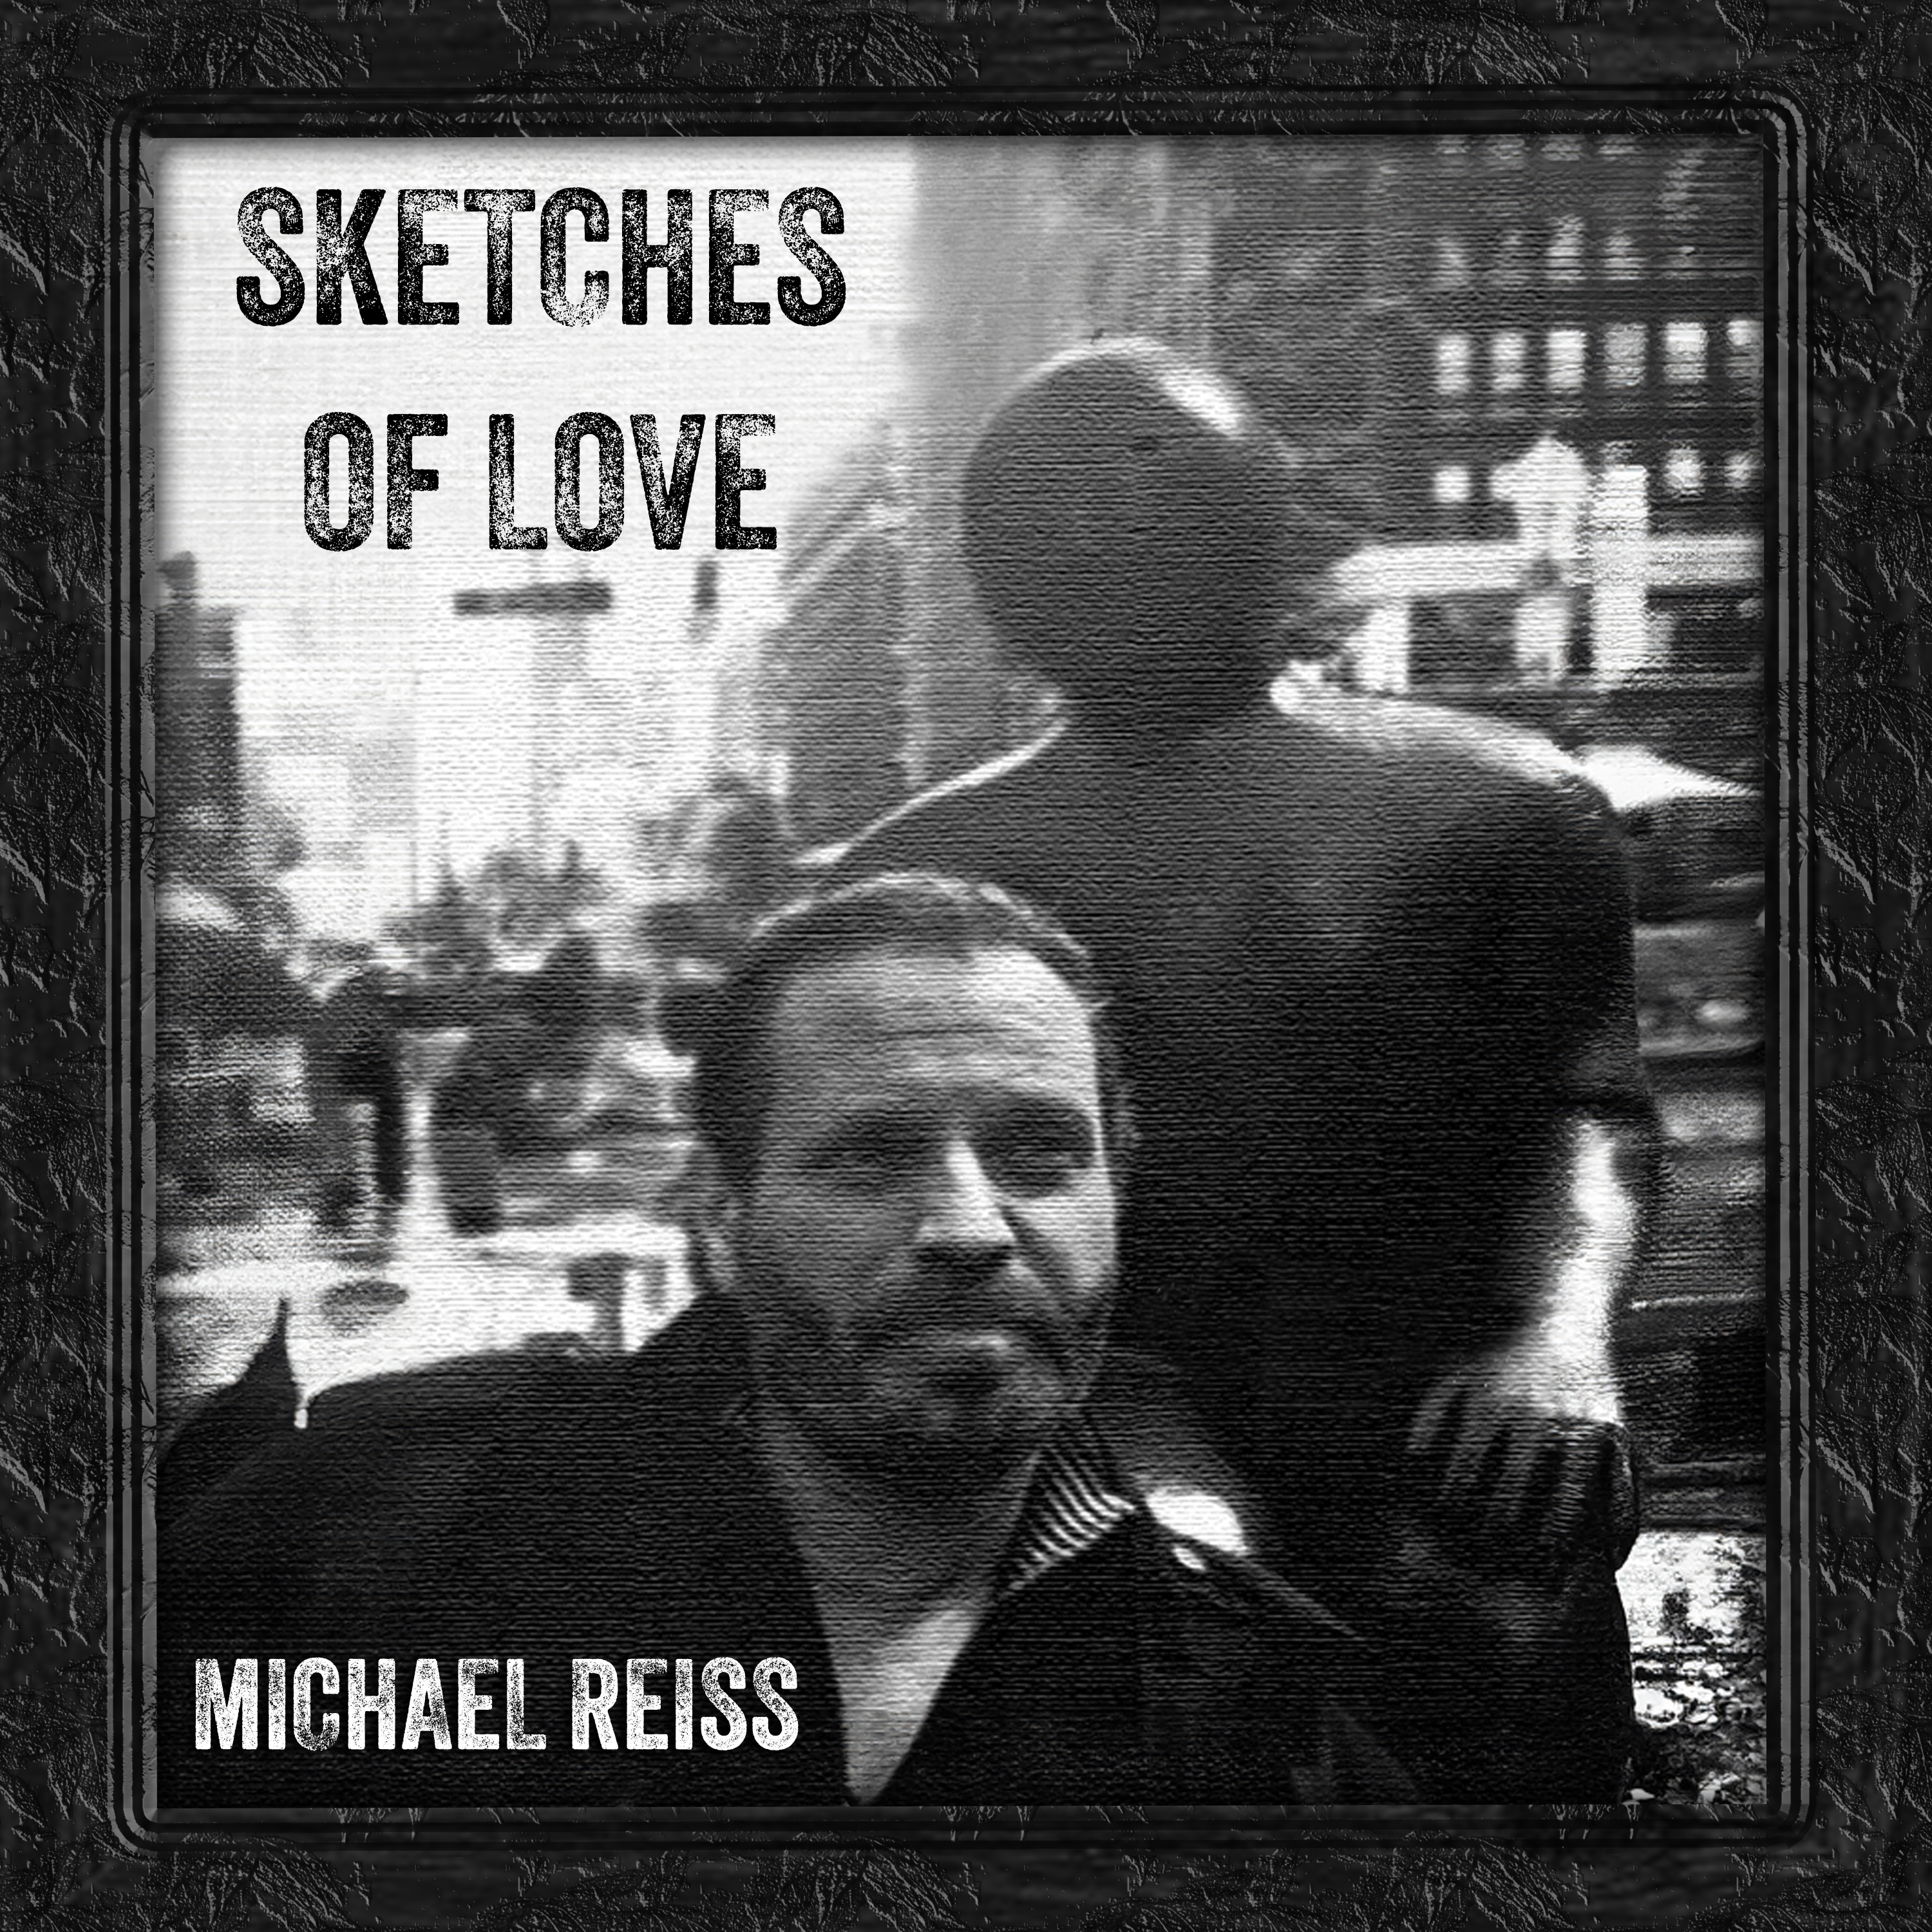 Sketches of Love by Michael Reiss